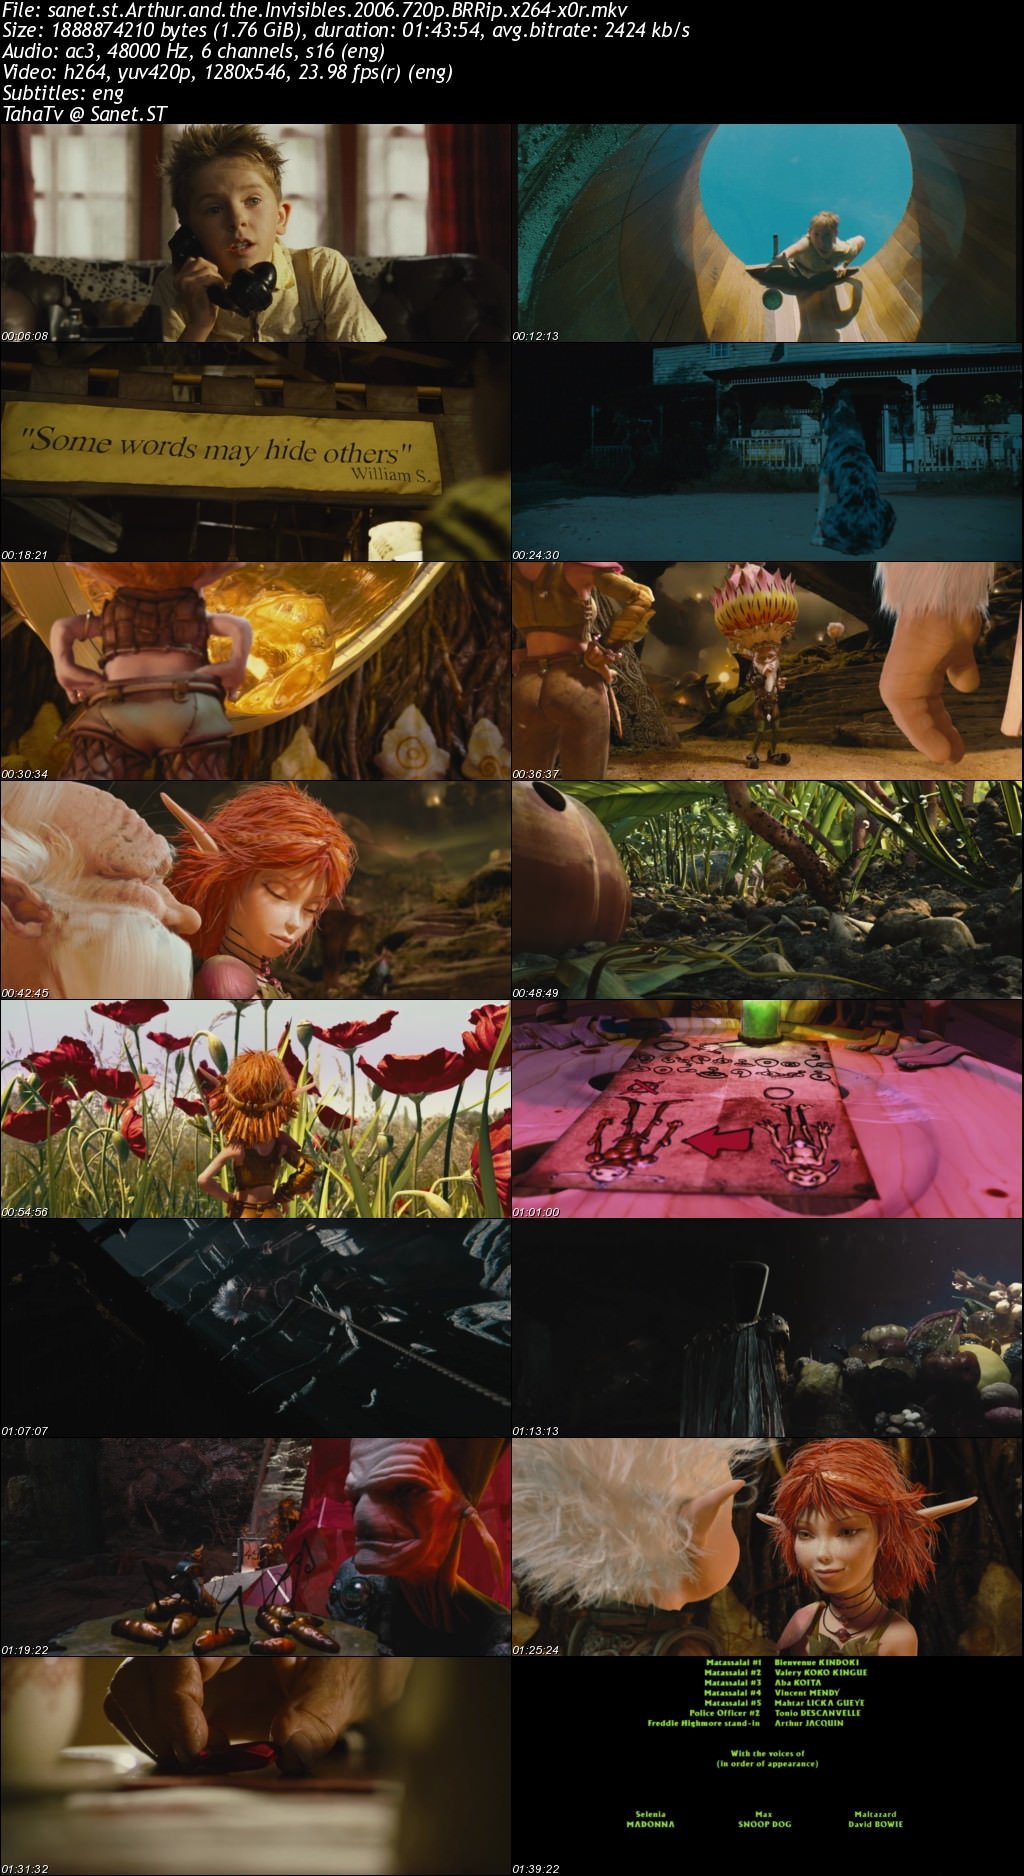 Arthur and the Invisibles 2006 720p BRRip x264-x0r.